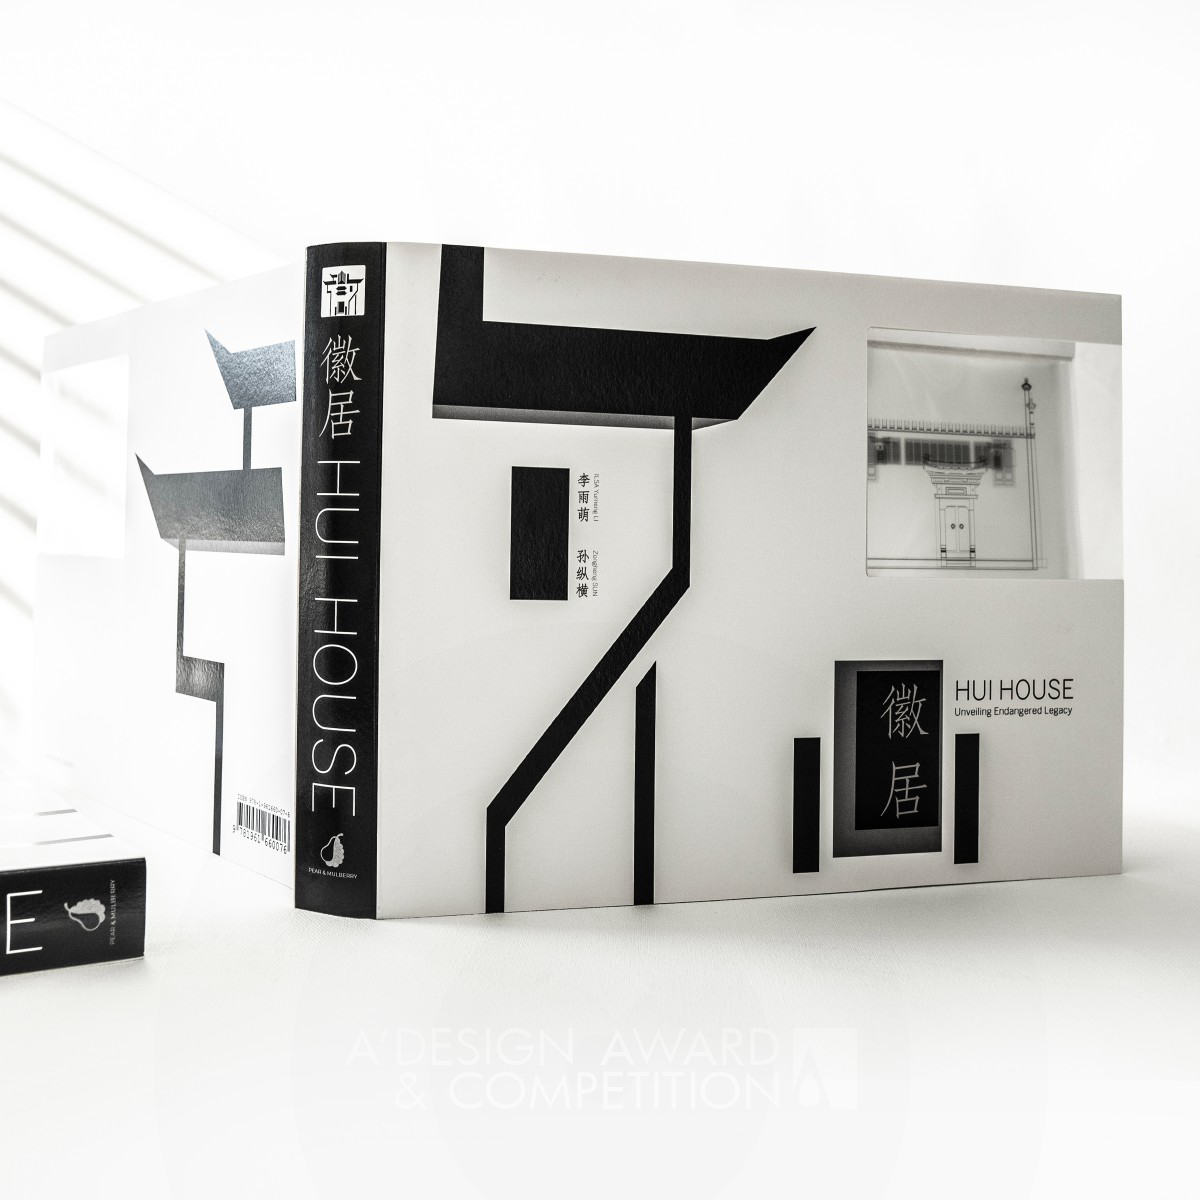 Hui House <b>Architectural Exhibition Book